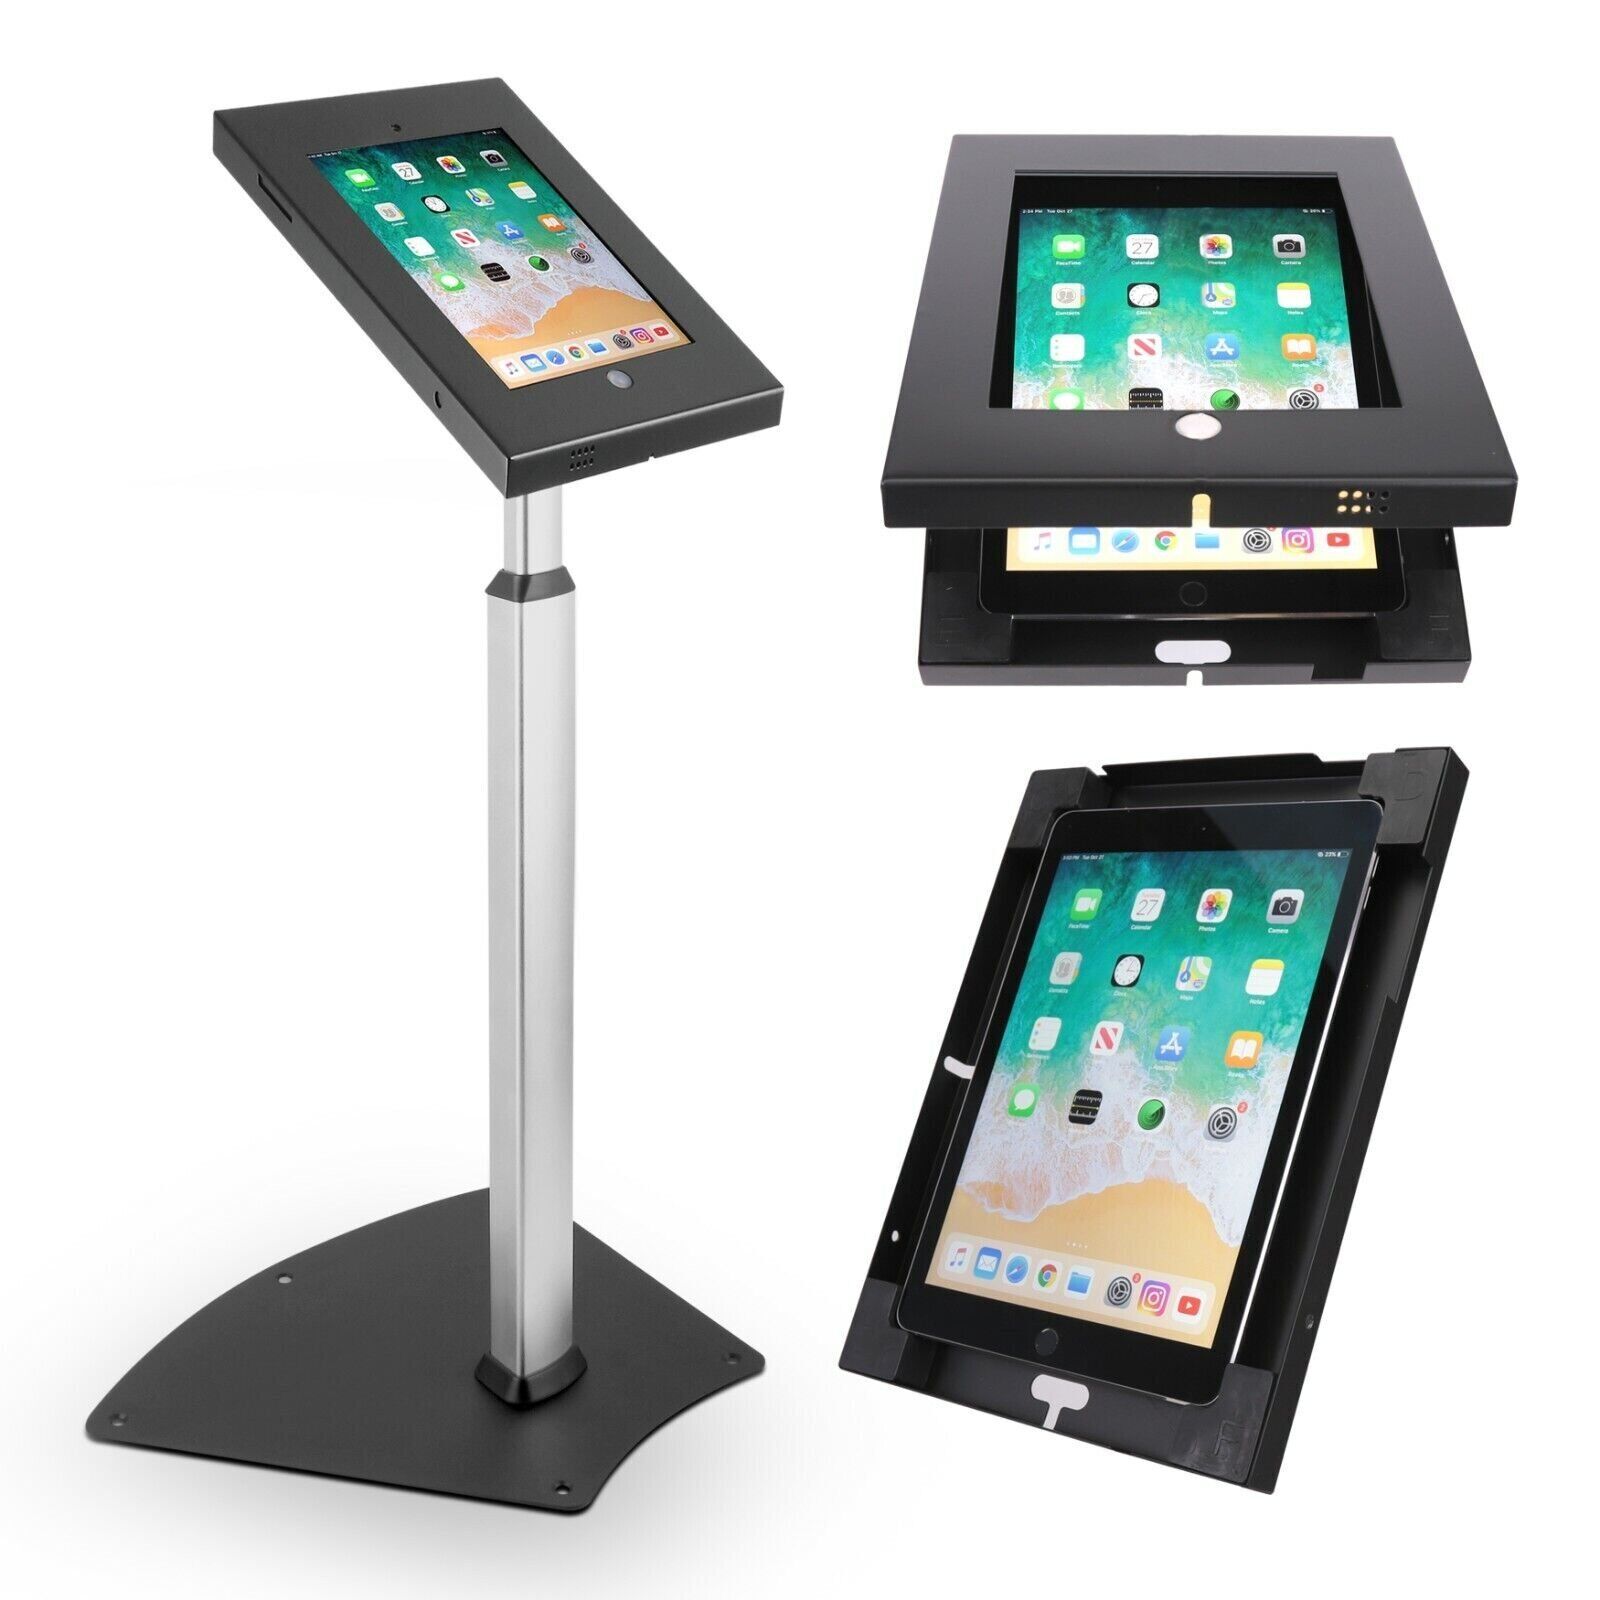 Pyle Universal Anti-Theft Floor Stand Holder/Display Case for iPads 2/3/4/Air